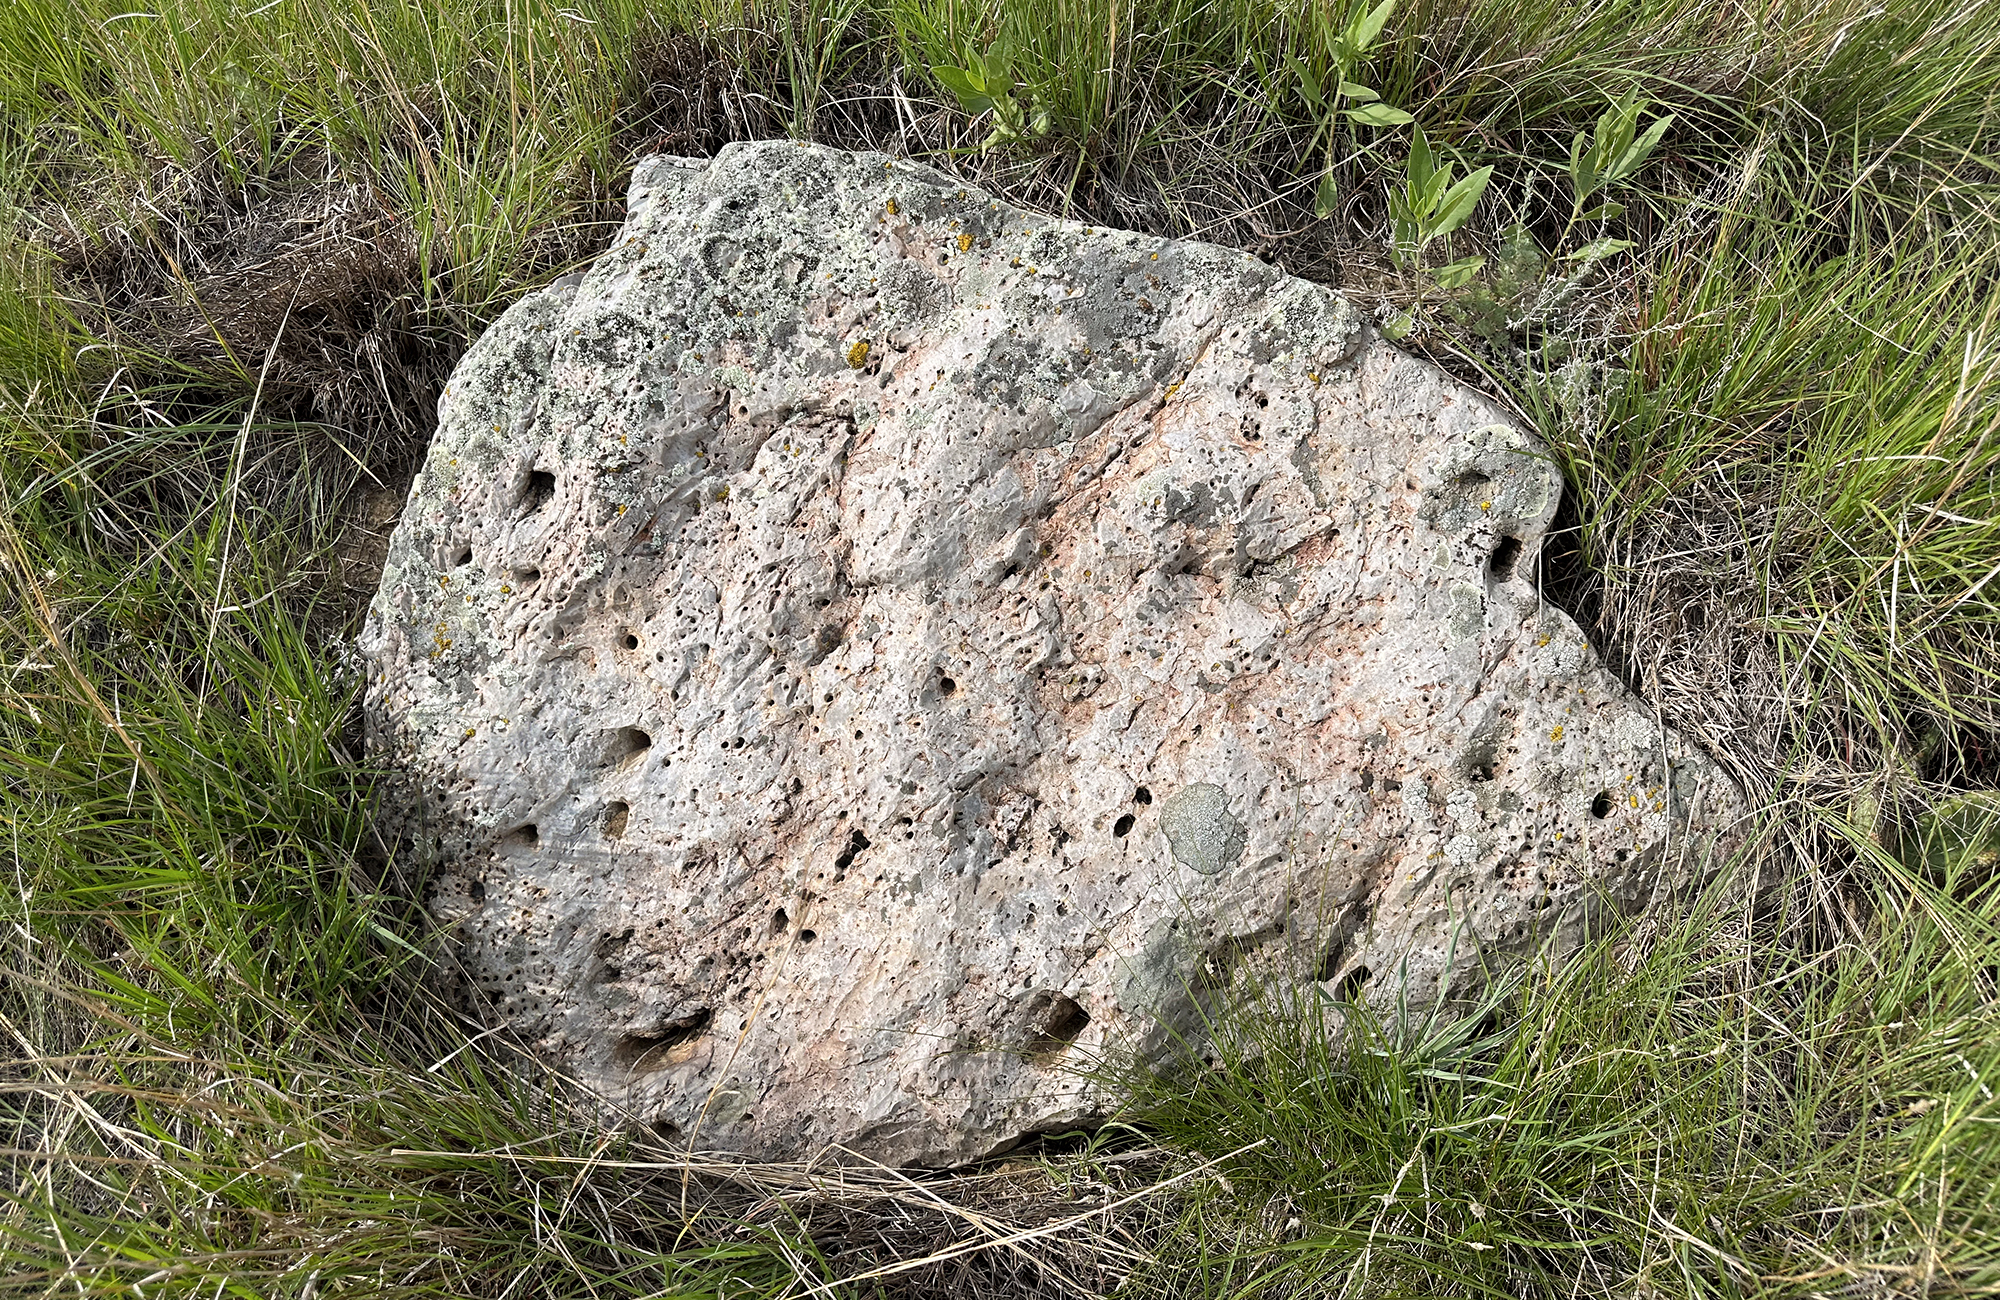 A slightly pink rock with thousands of little holes laying in the grass.